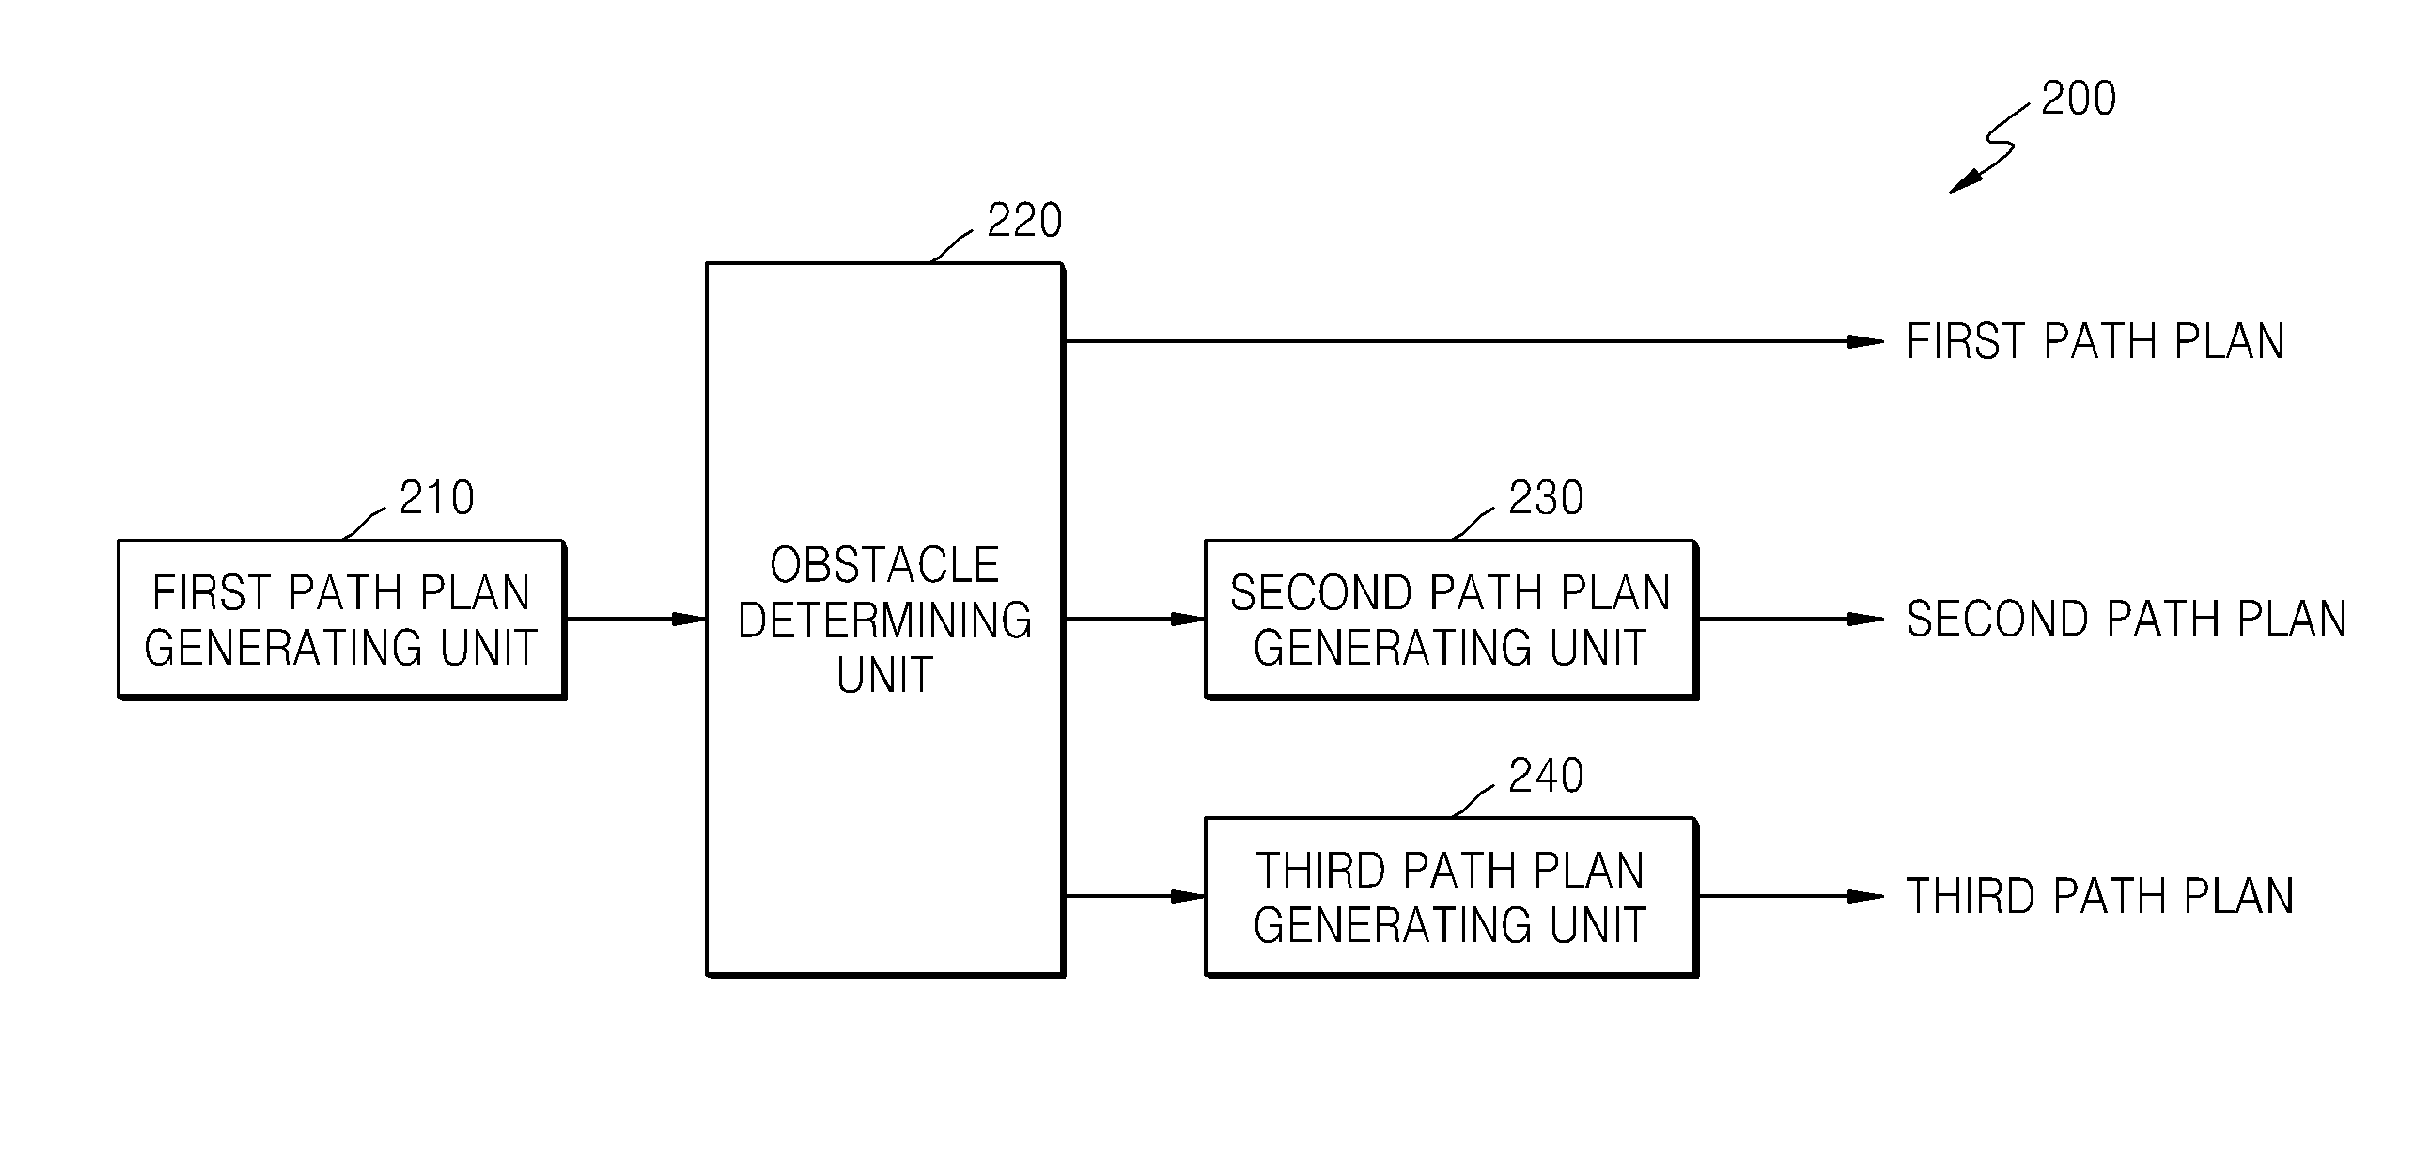 Apparatus and method for planning path of robot, and the recording media storing the program for performing the method